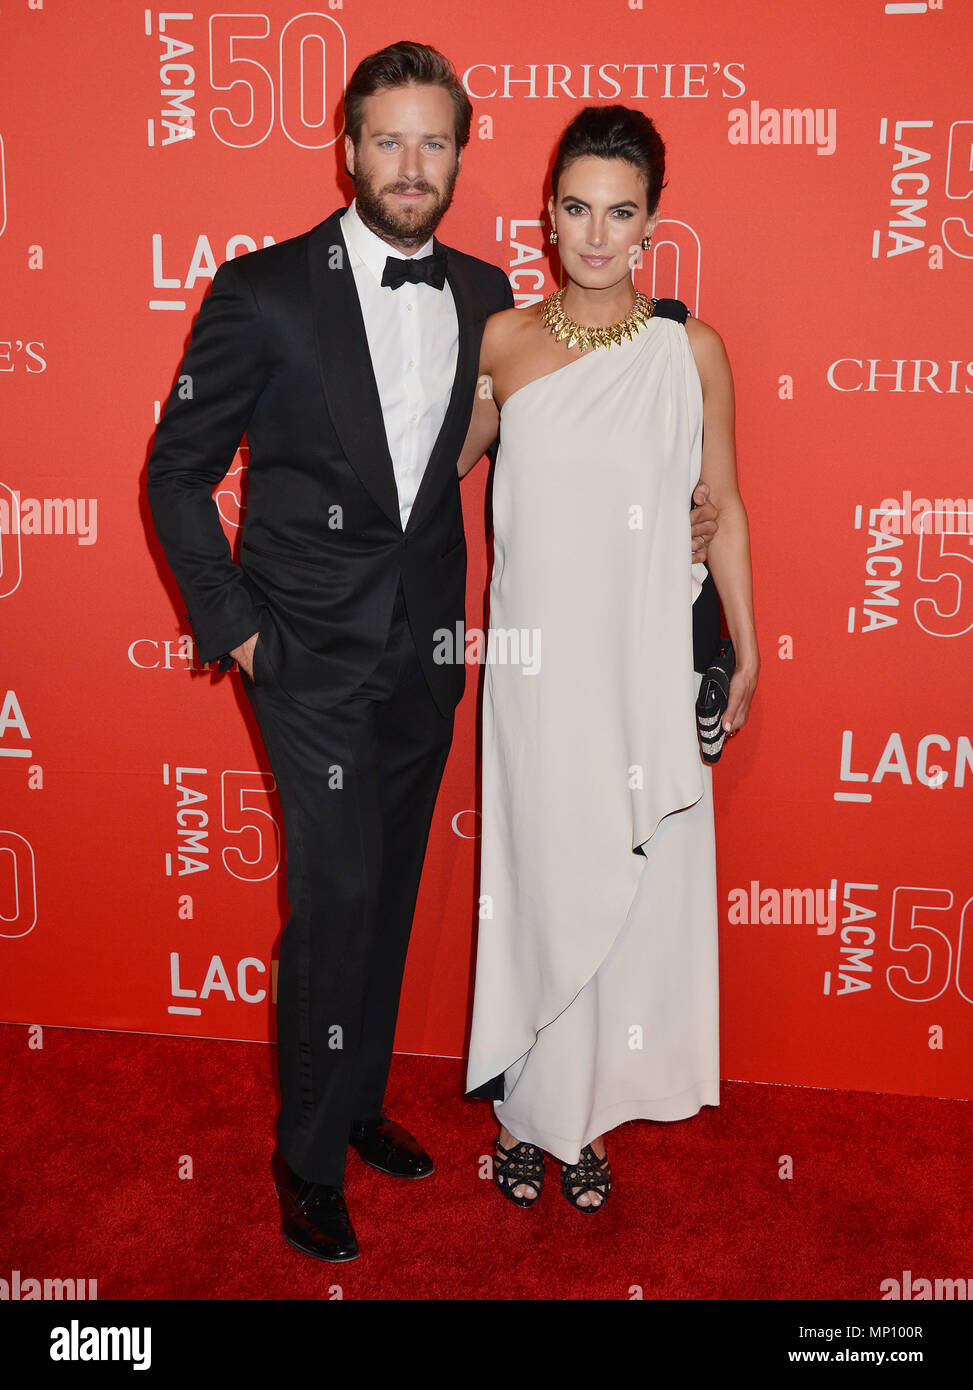 Armie Hammer and Wife Elizabeth Chambers 047 at the  LACMA 50th Ann. Gala 2015 at the LACMA Museum in Los Angeles. April 18, 2015.Armie Hammer and Wife Elizabeth Chambers 047 ------------- Red Carpet Event, Vertical, USA, Film Industry, Celebrities,  Photography, Bestof, Arts Culture and Entertainment, Topix Celebrities fashion /  Vertical, Best of, Event in Hollywood Life - California,  Red Carpet and backstage, USA, Film Industry, Celebrities,  movie celebrities, TV celebrities, Music celebrities, Photography, Bestof, Arts Culture and Entertainment,  Topix, vertical,  family from from the ye Stock Photo